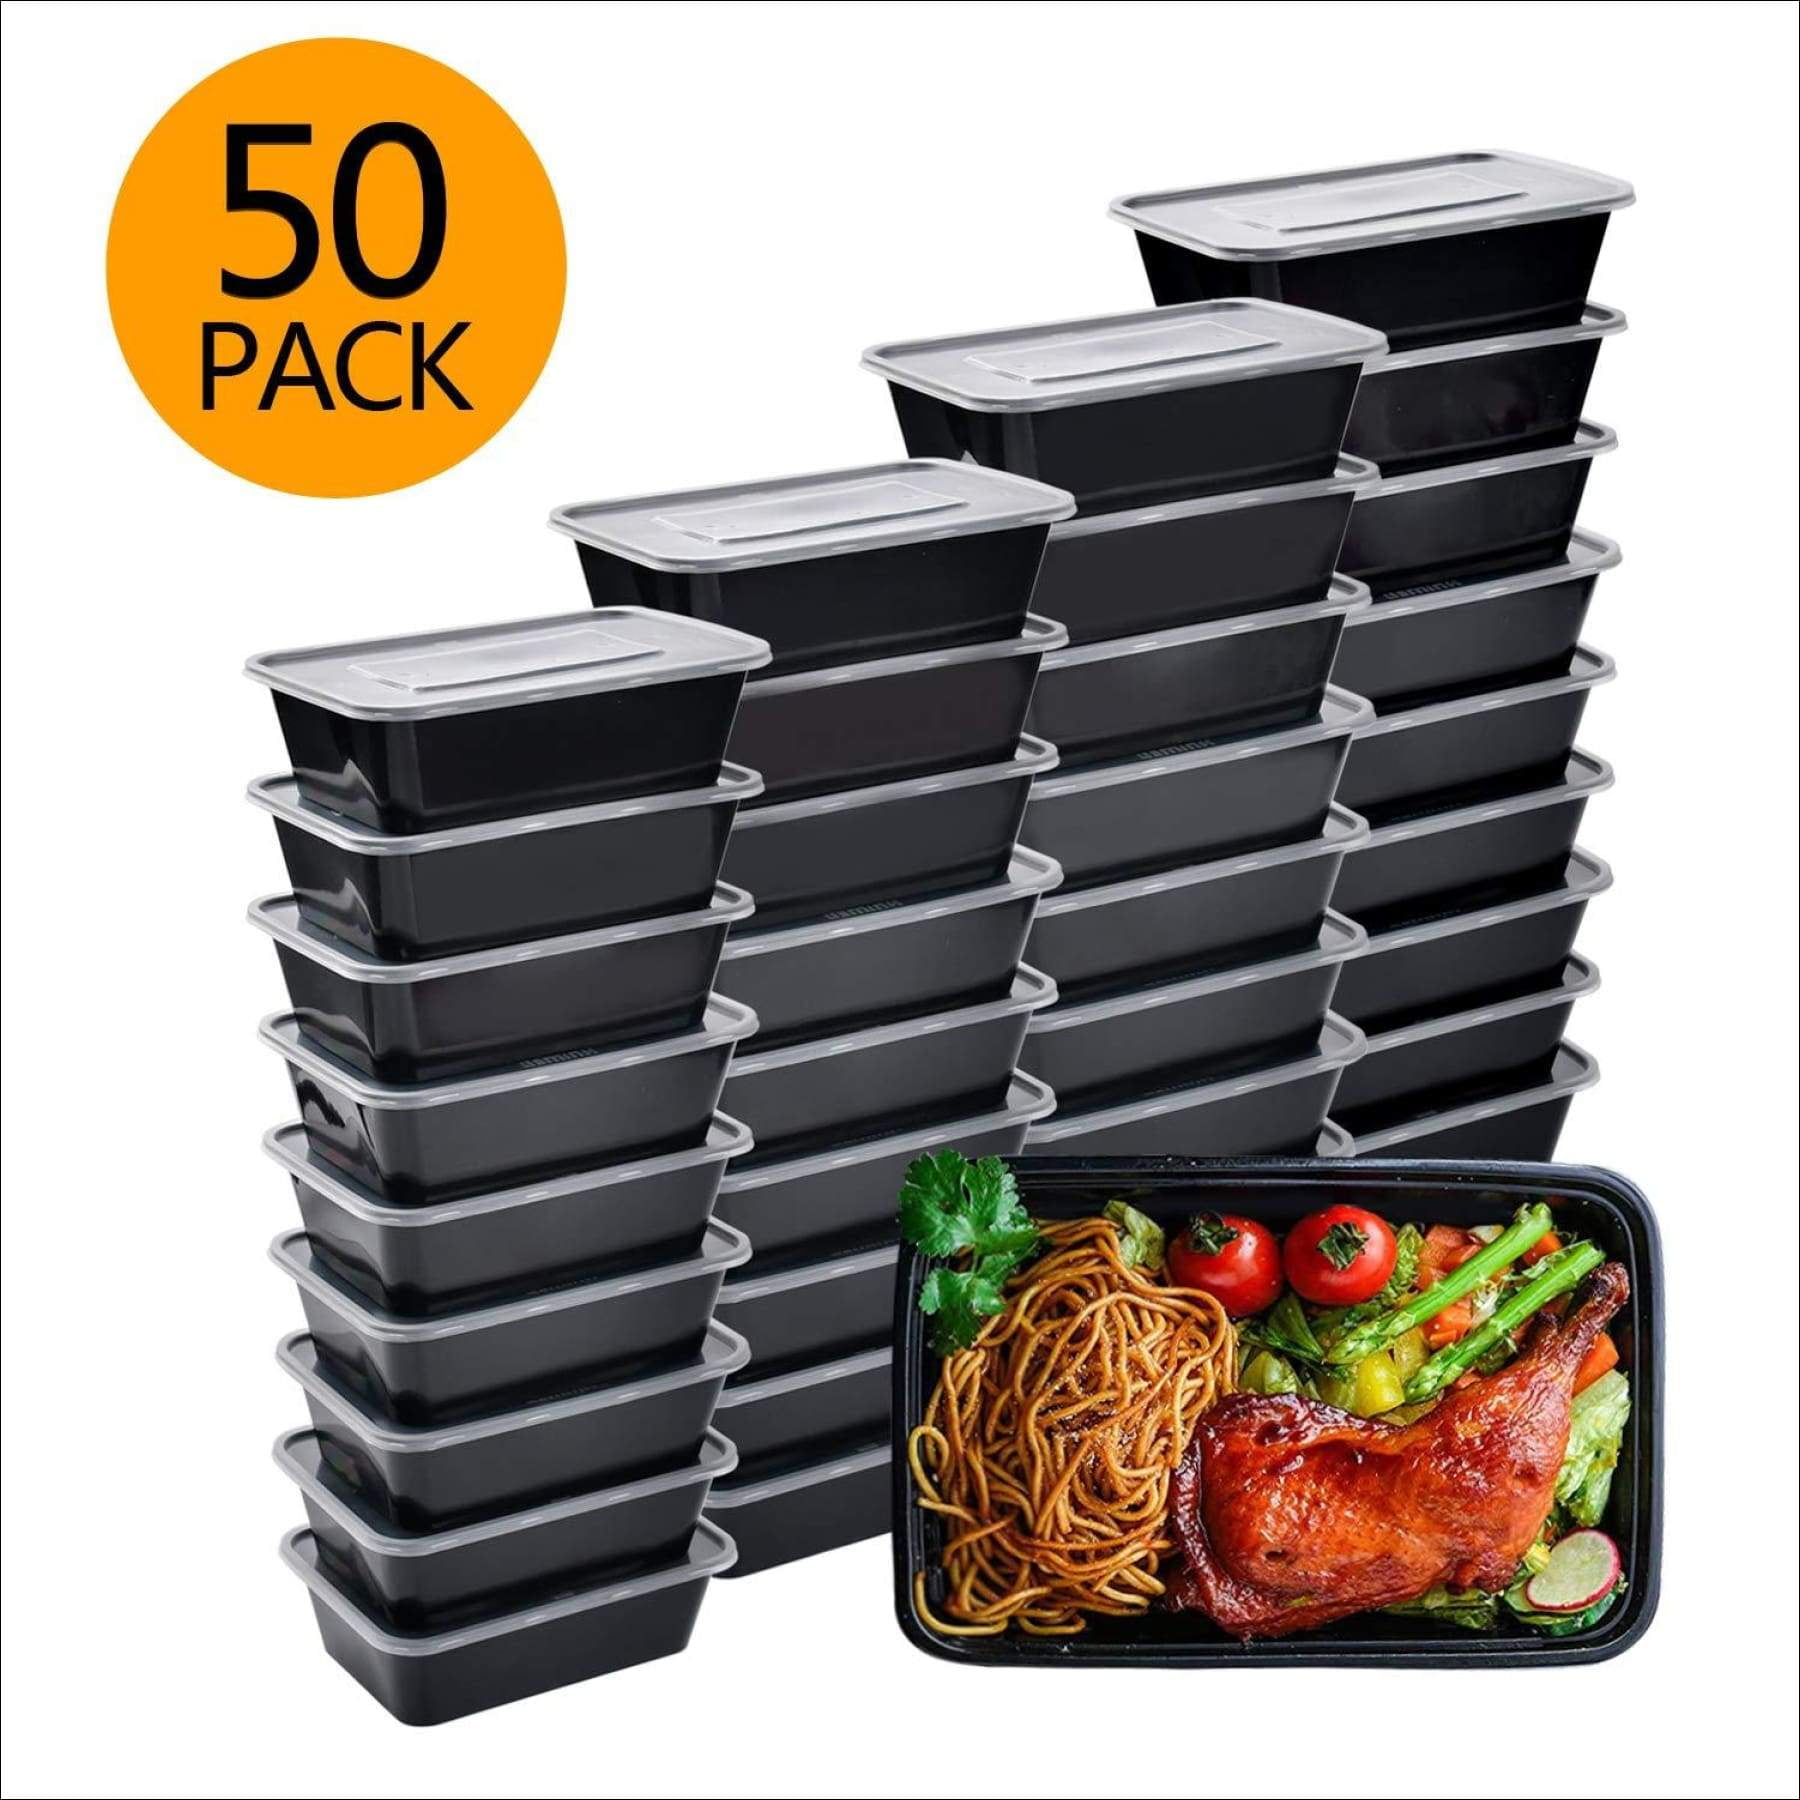  NutriBox [20 value pack] single one compartment 12oz MINI Meal  Prep Food Storage Containers - BPA Free Reusable Lunch bento Box with Lids  - Spill proof, Microwave, Dishwasher and Freezer Safe